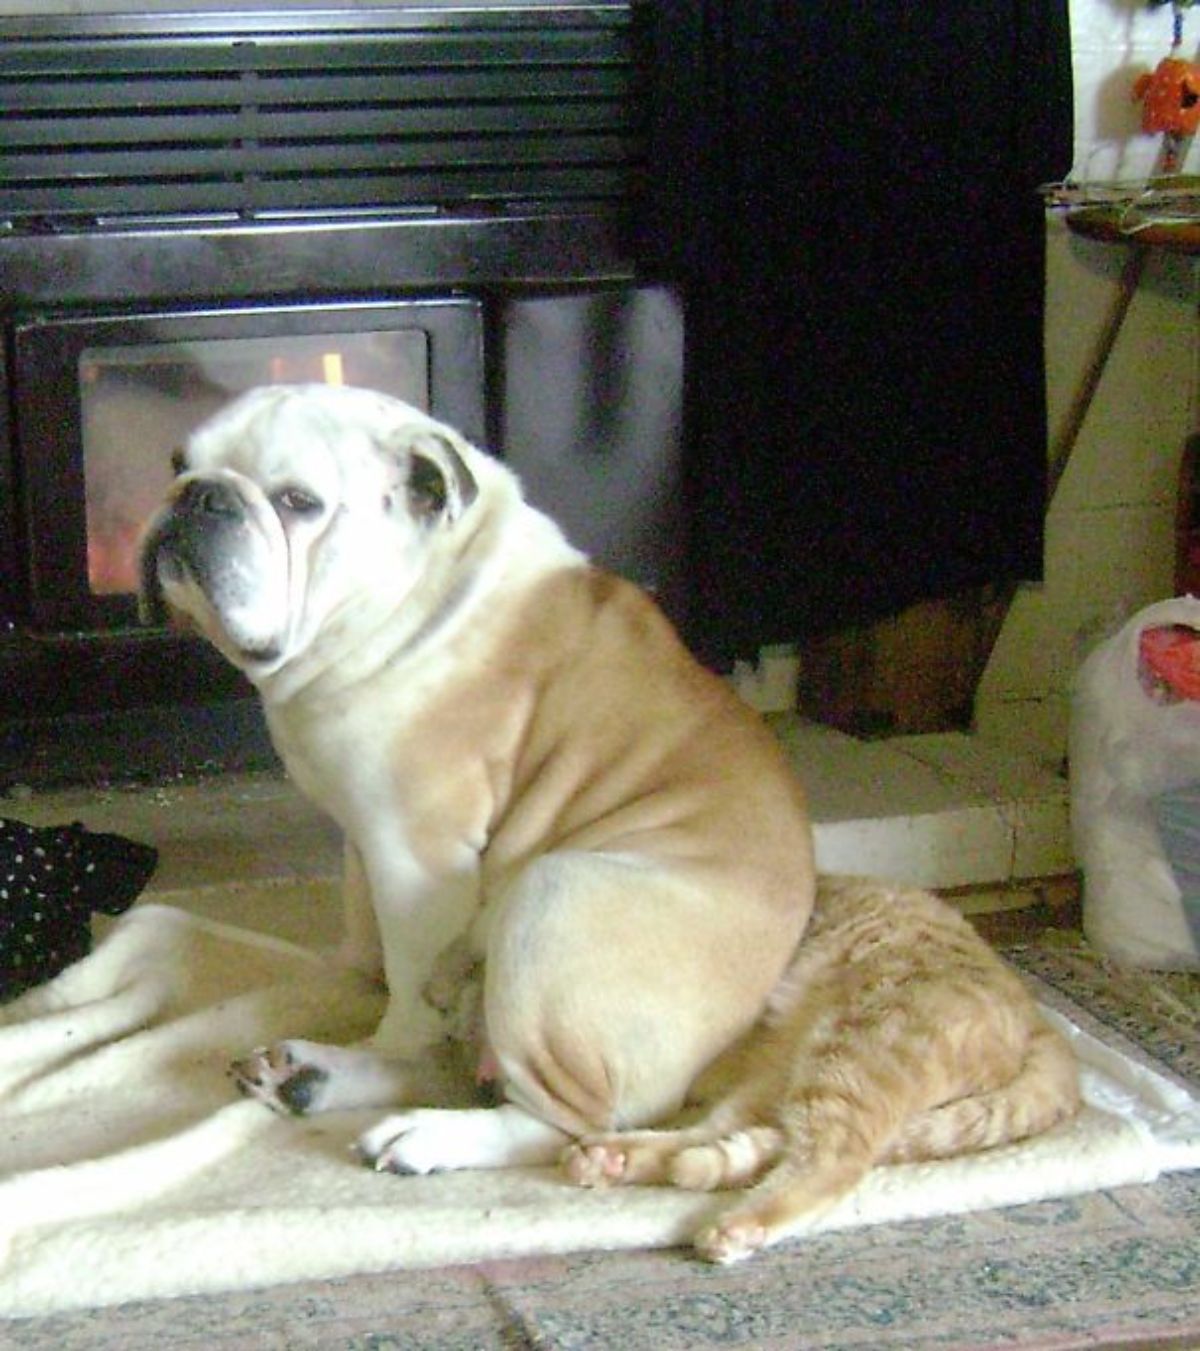 brown and white english bulldog sitting on an orange cat laying on a white blanket on the floor